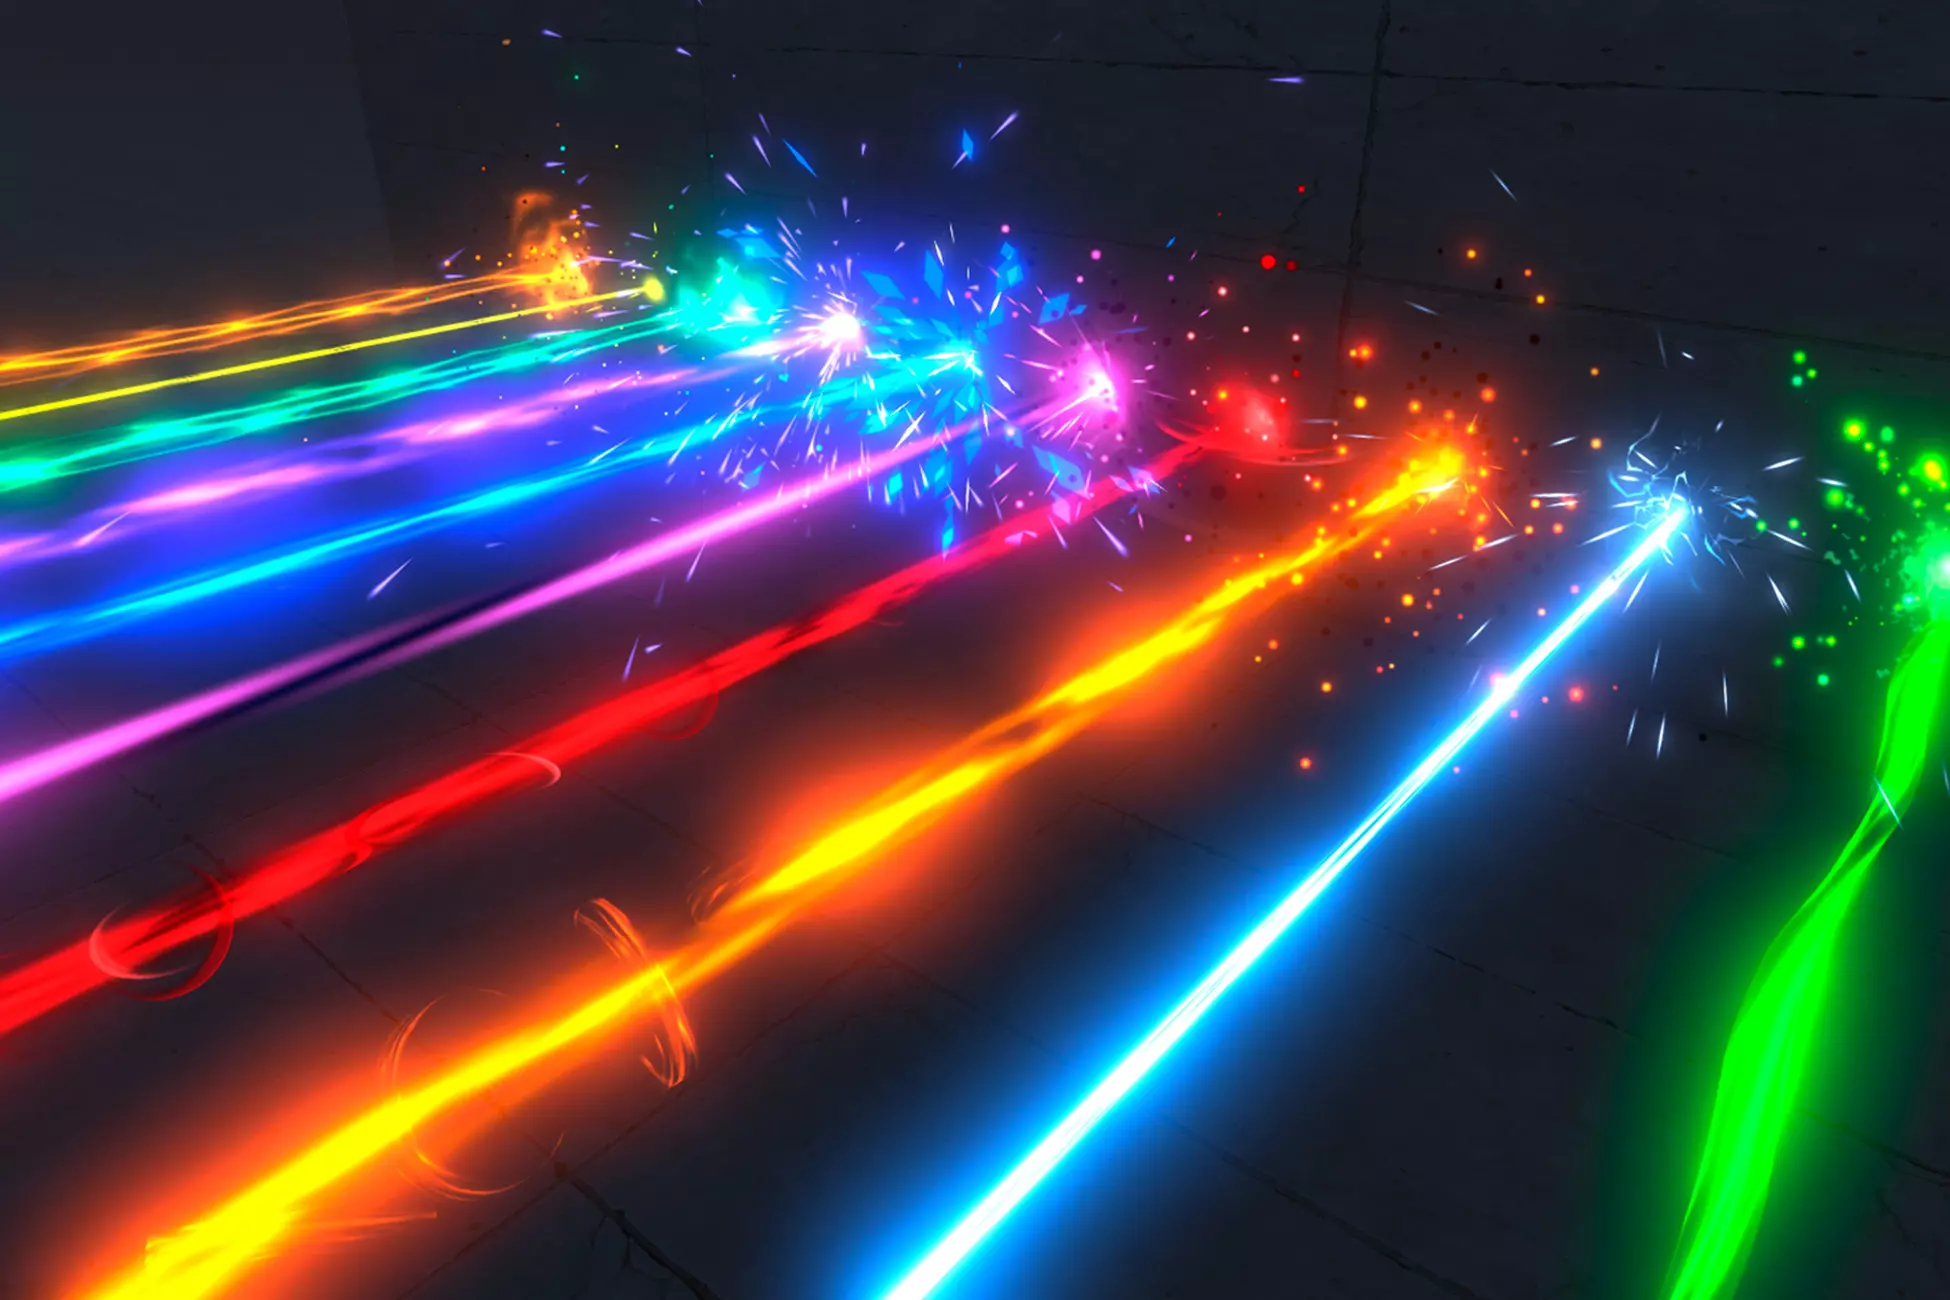 Unity Asset 3D Lasers Pack free download